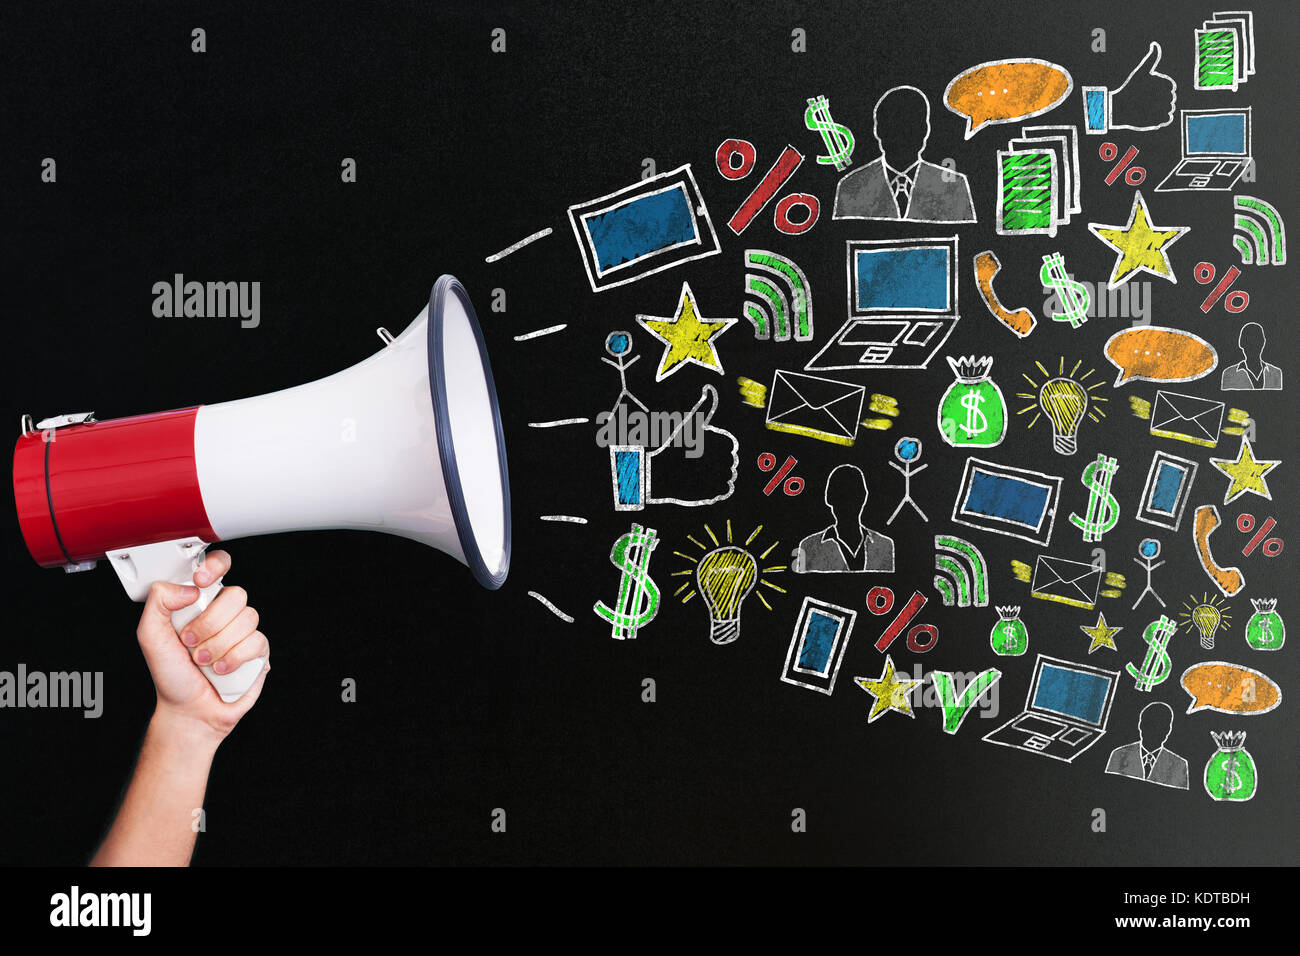 Hand Holding Megaphone With Different Icons For Digital Marketing Concept On Blackboard Stock Photo